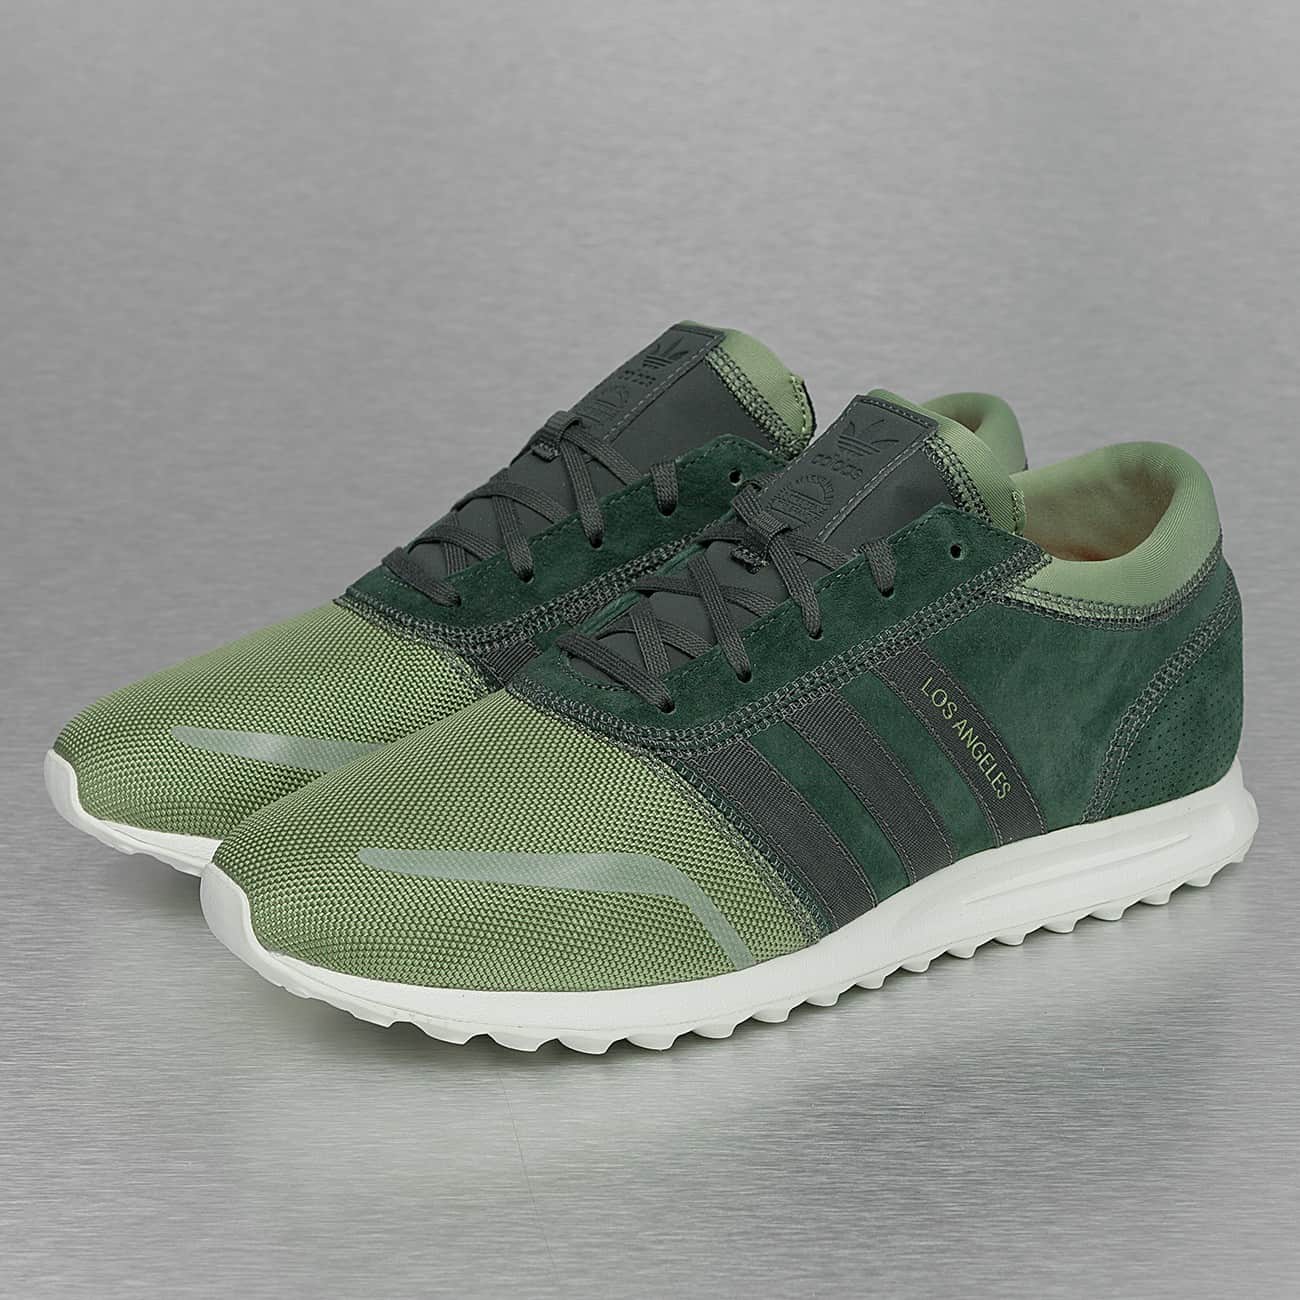 adidas-los-angeles-sneakers-utility-ivy-tent-green-core-black